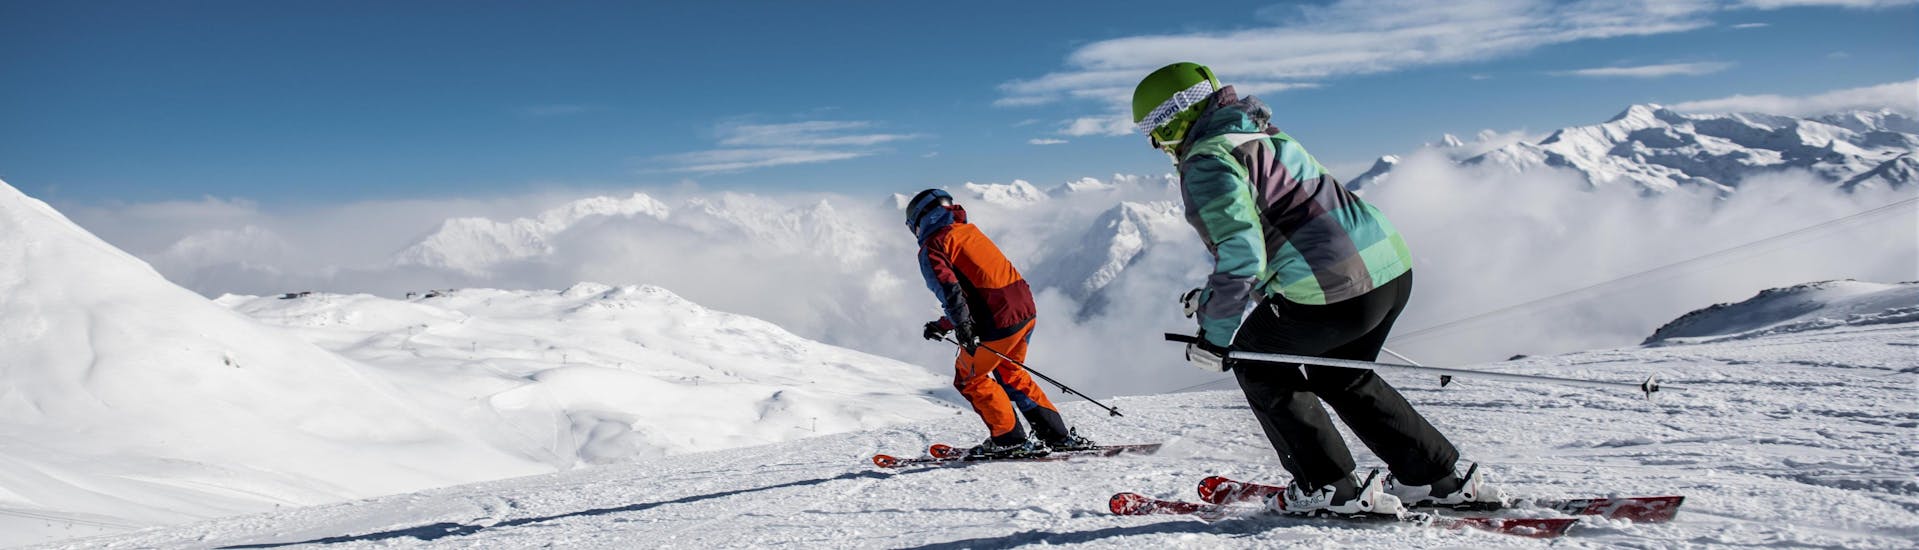 Two skiers are skiing down a freshly prepared slope in the Swiss ski resort of Klosters, a popular place to book ski lessons with one of the local ski schools.